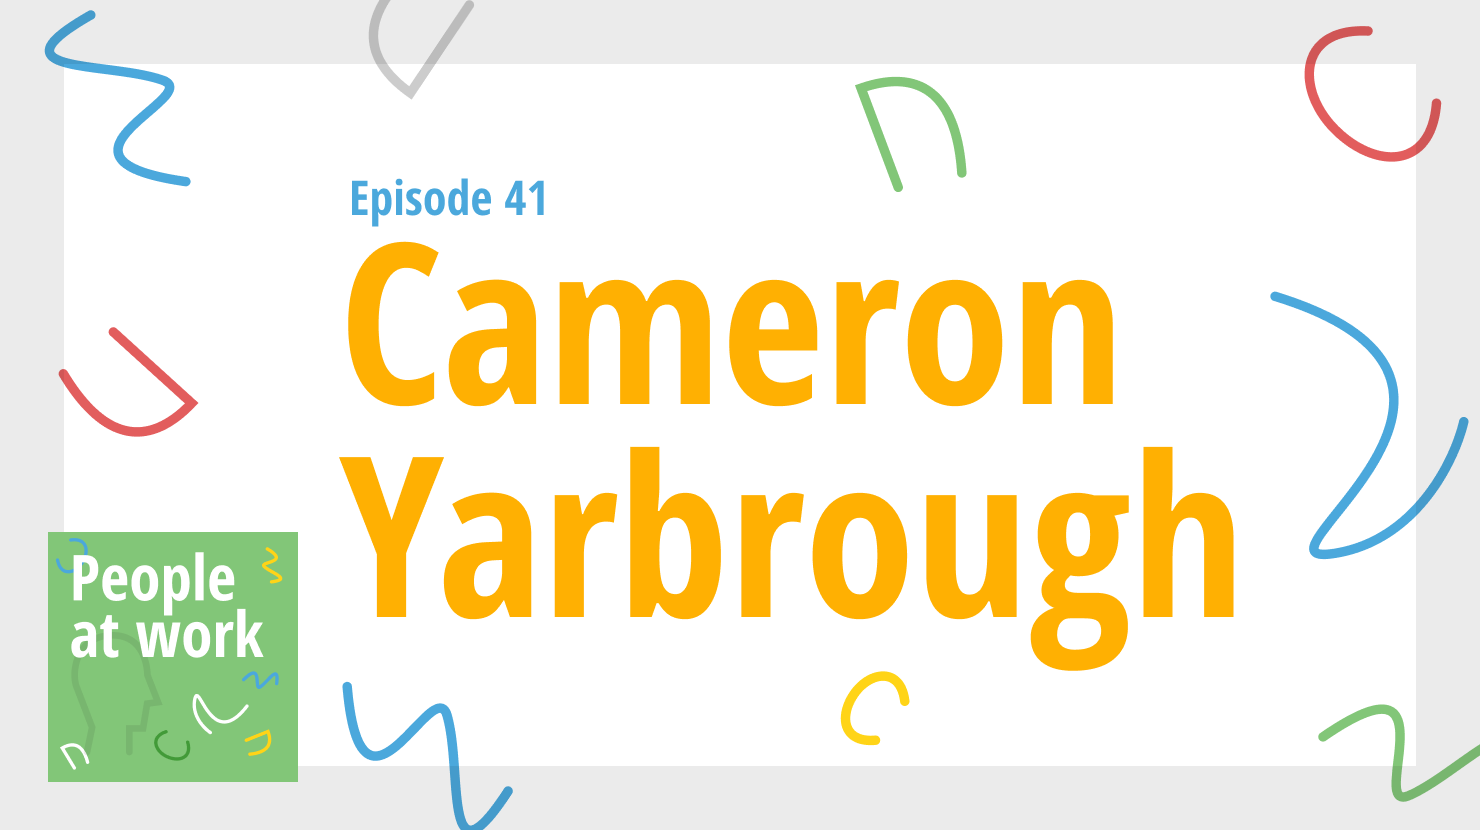 Leadership traits in conflict? Get a coach says Cameron Yarbrough.